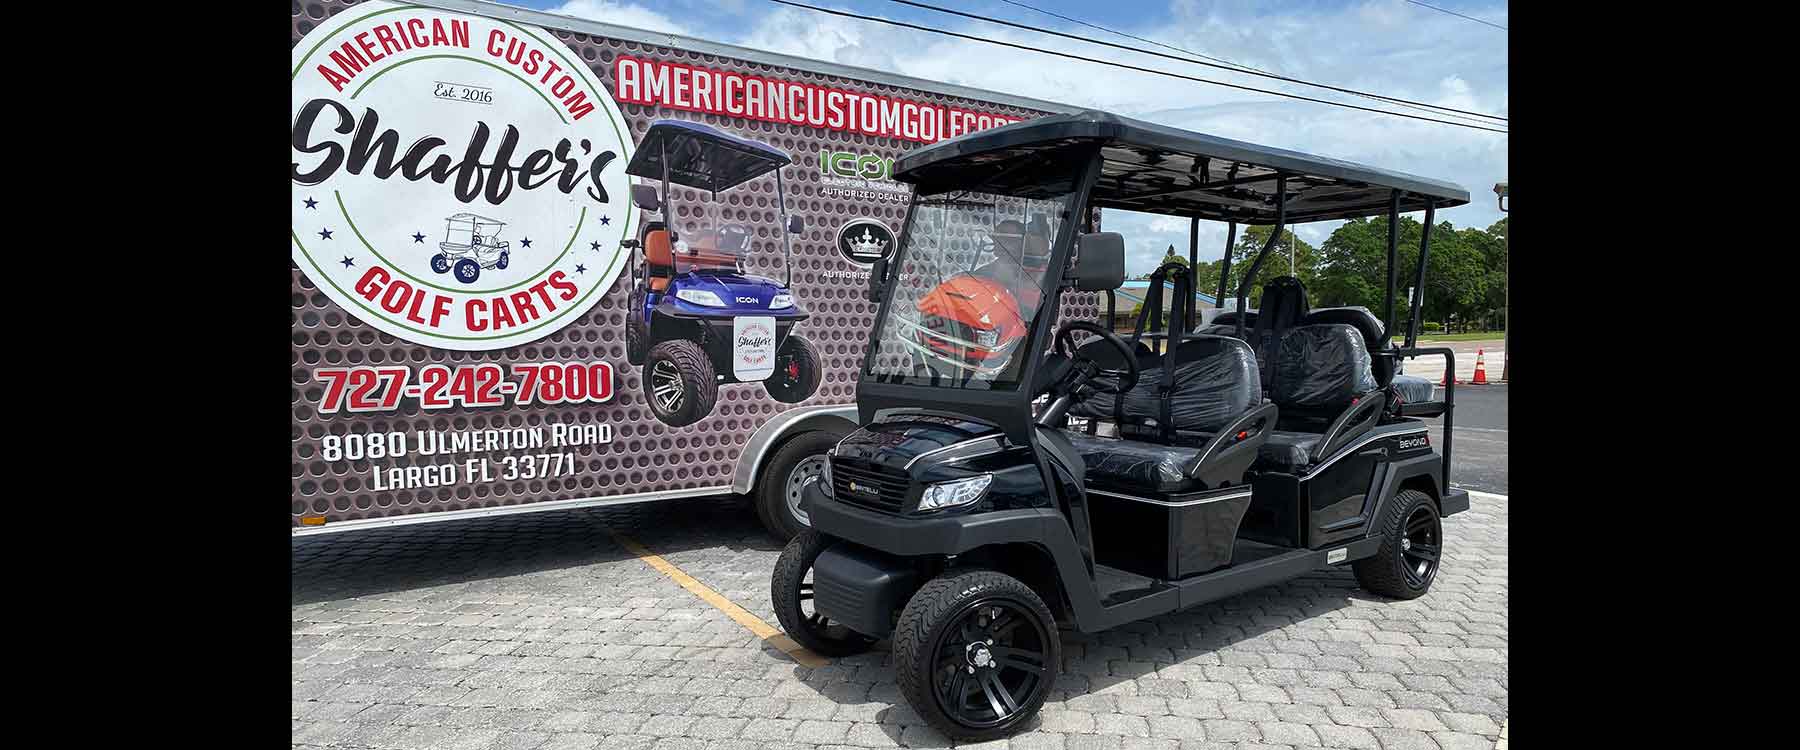 Home | Golf Cart Dealer | Service and Golf Carts for Sale in Clearwater, Tampa, Sarasota FL at ...